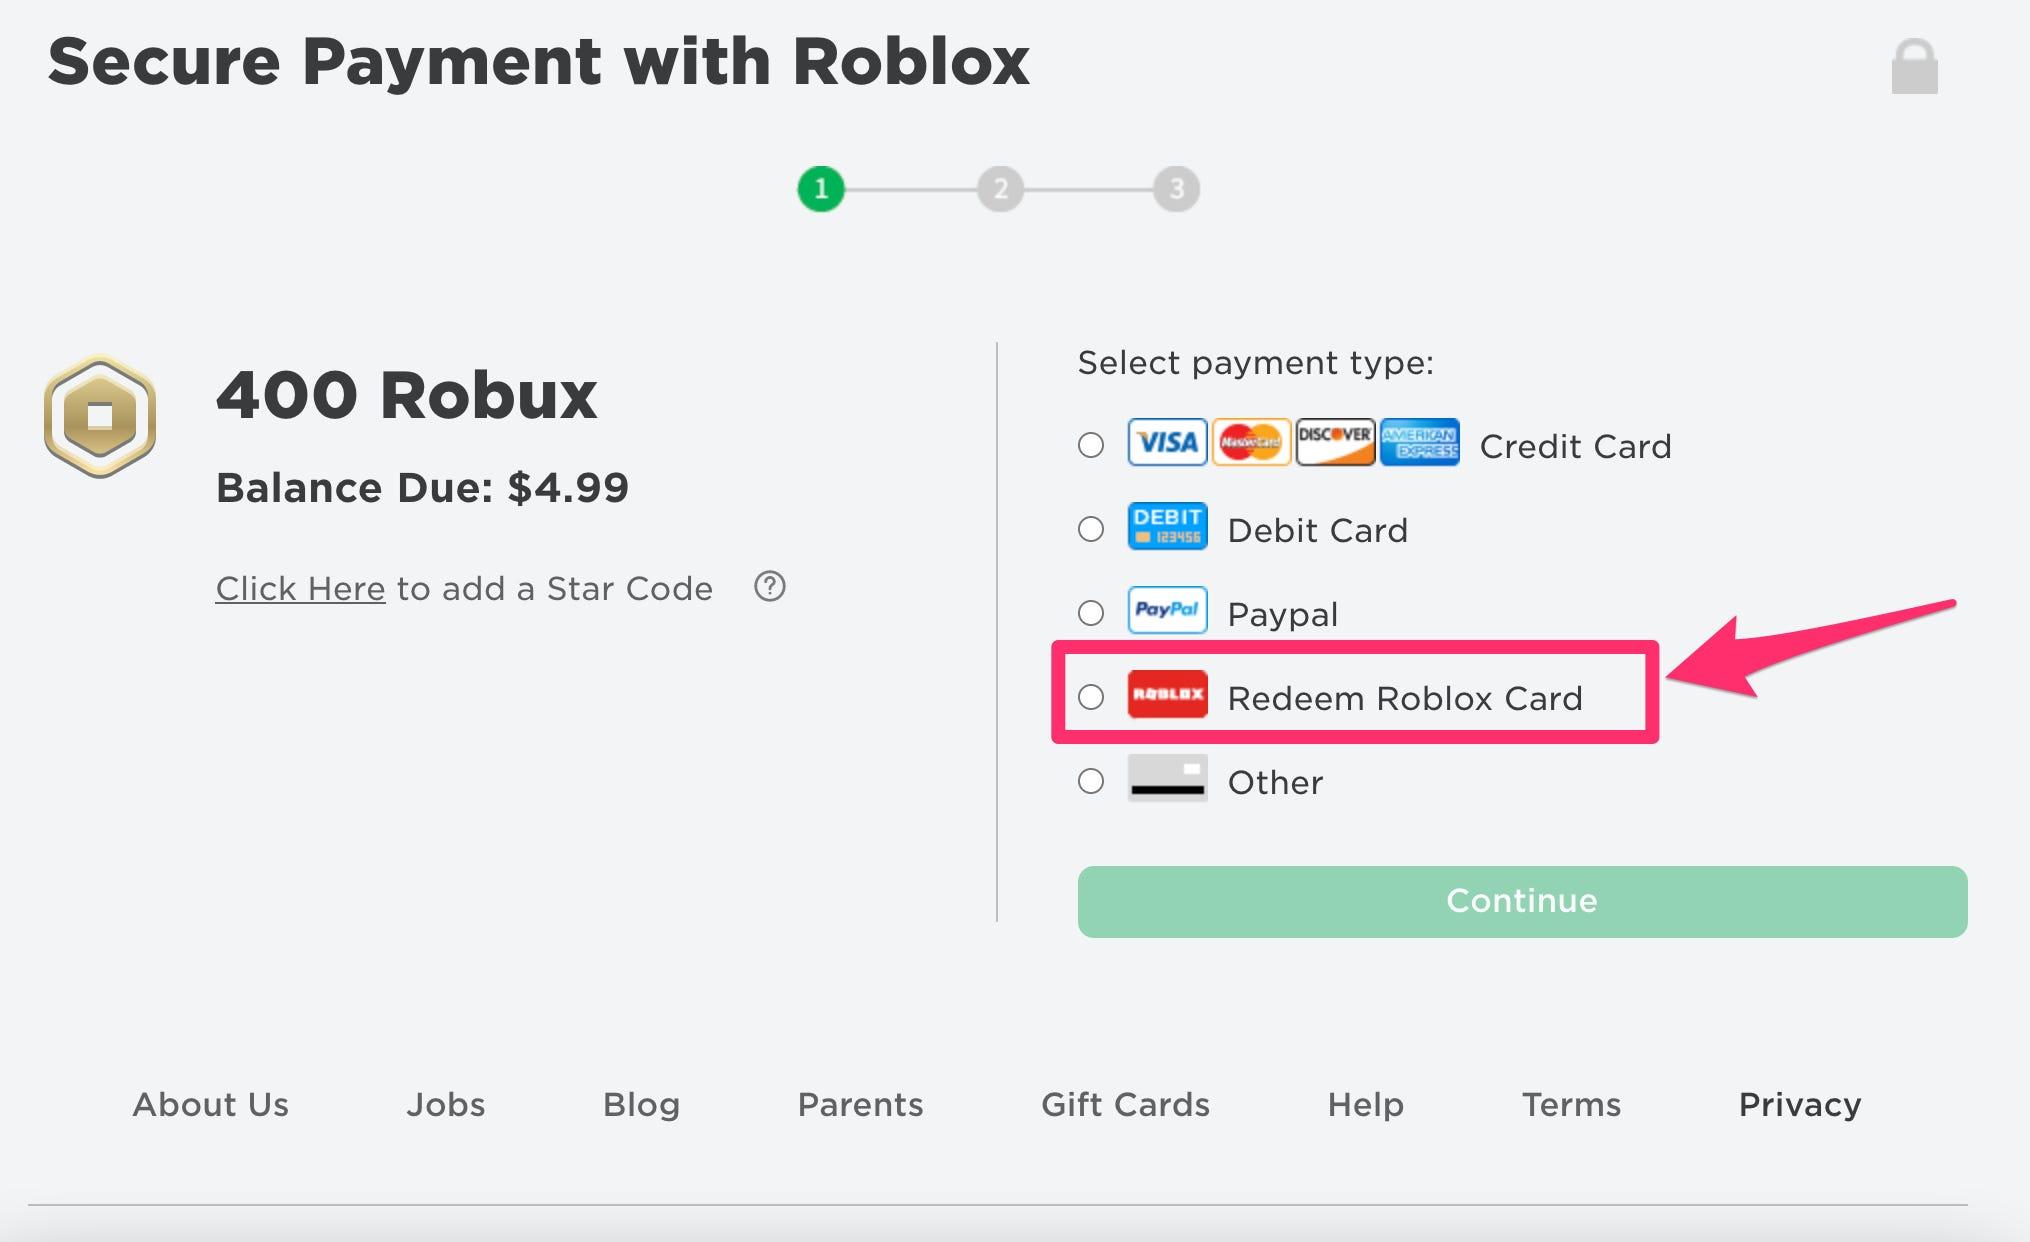 How To Redeem A Roblox Gift Card In 2 Different Ways So You Can Buy In Game Accessories And Upgrades Business Insider Africa - roblox playing cards accessory